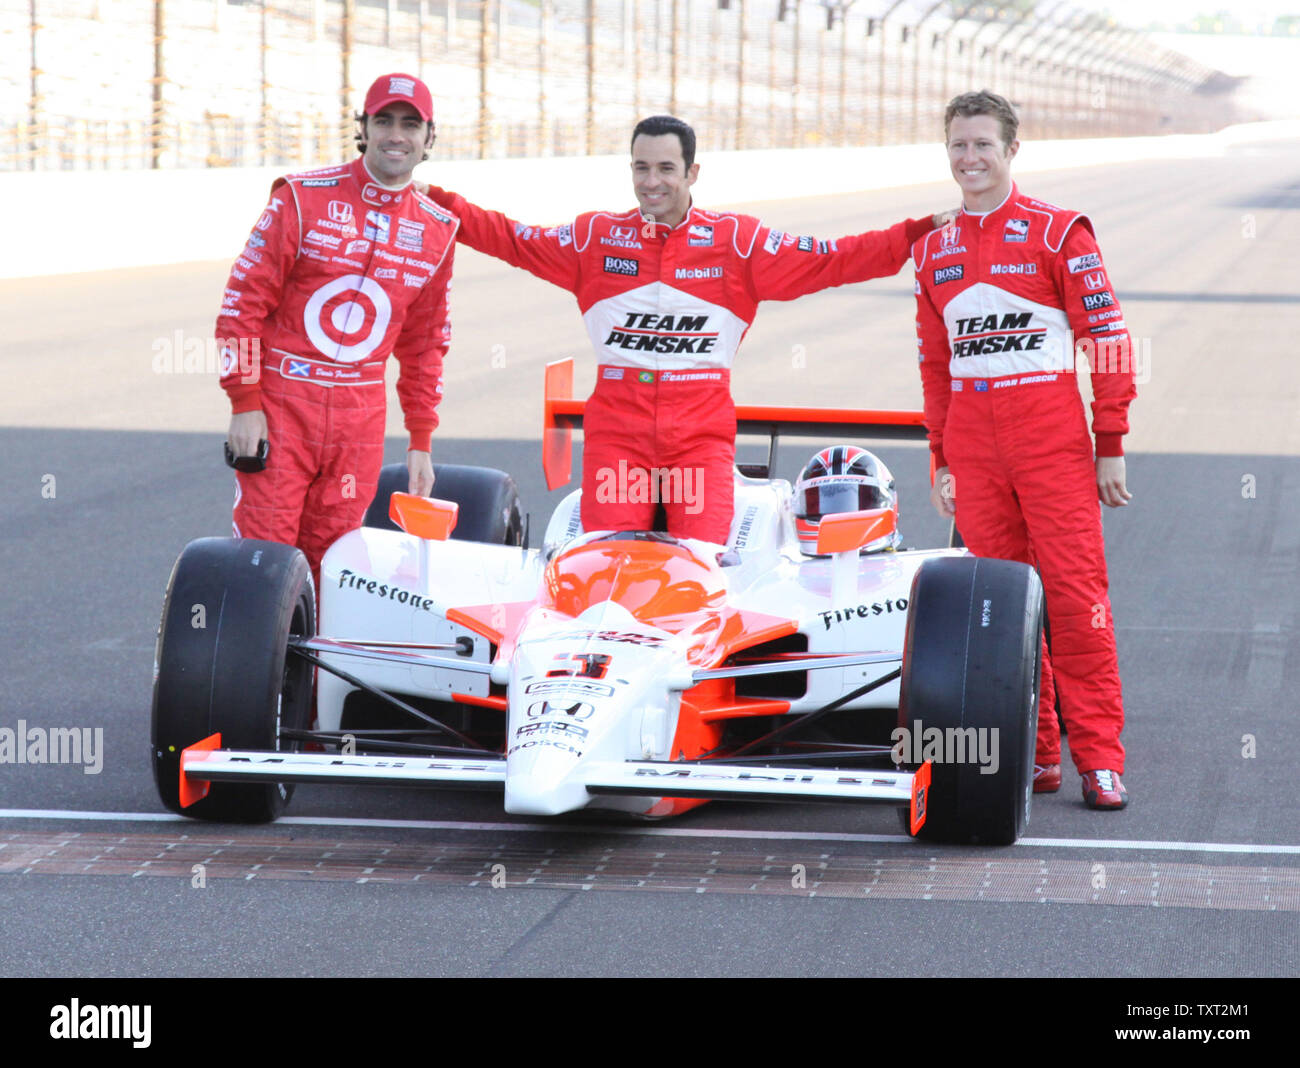 Penske team mate Ryan Briscoe and Target Team driver Dario Franchitti stand next to pole sitter Helio Castroneves during the traditional front row photo session on May 10, 2009 at the Indianapolis Motor Speedway in Indianapolis, Indiana. (UPI Photo/Ed Locke) Stock Photo